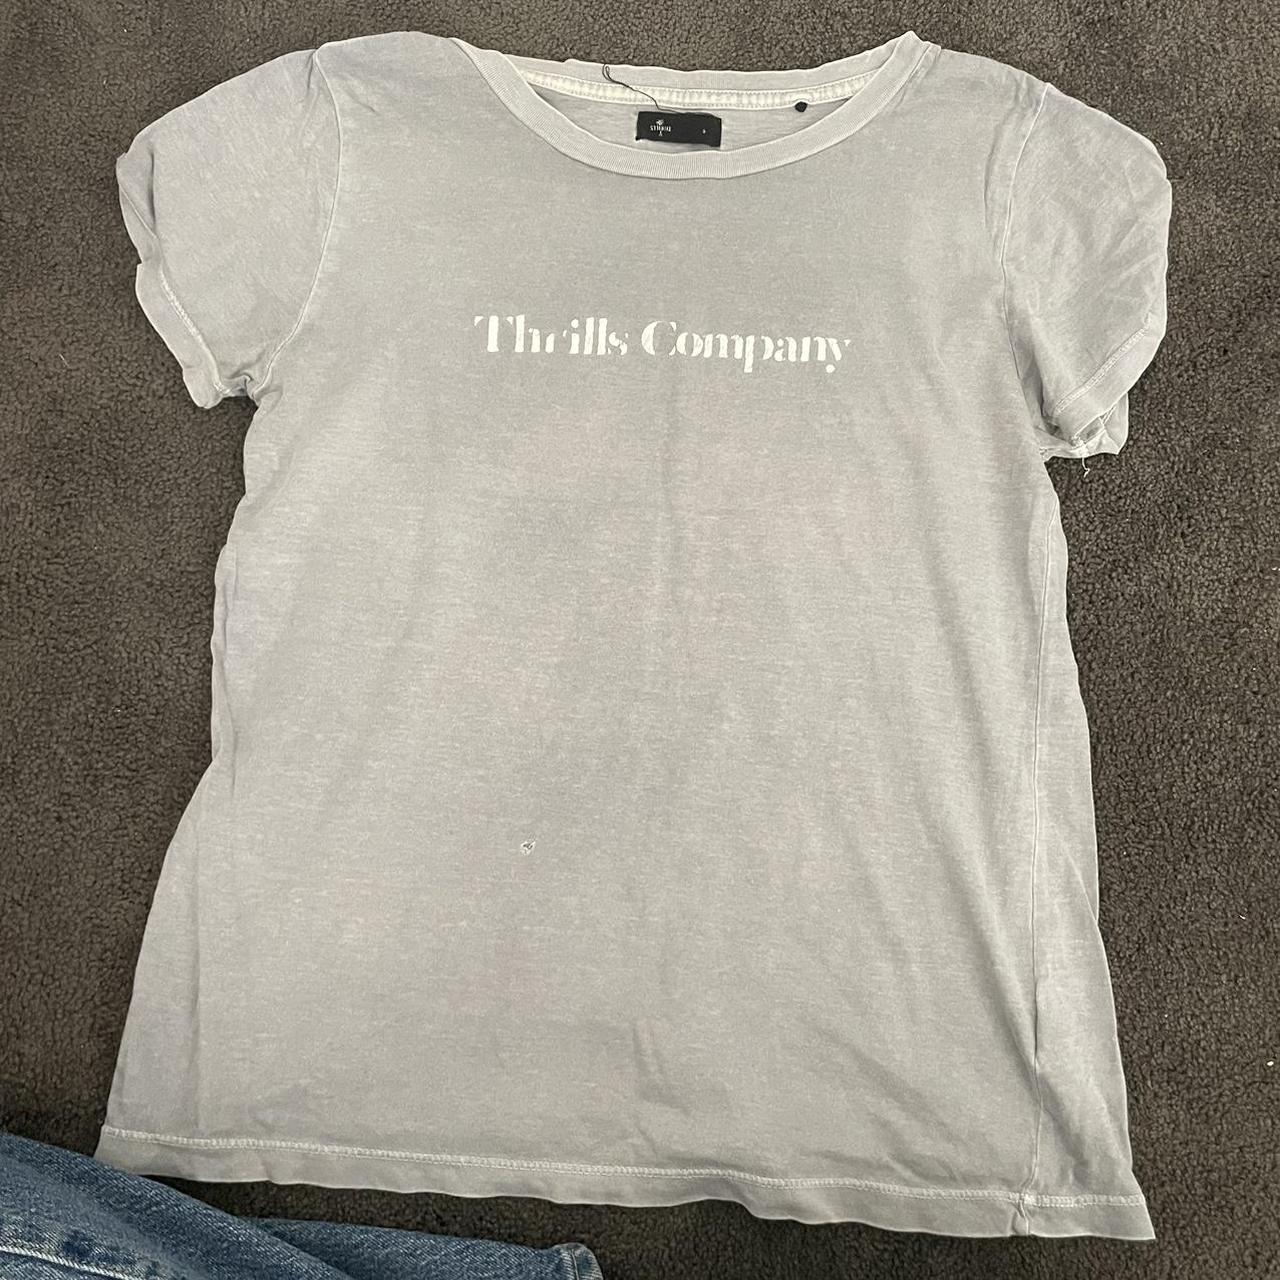 Thrills company basic tee. Only worn a couple times - Depop